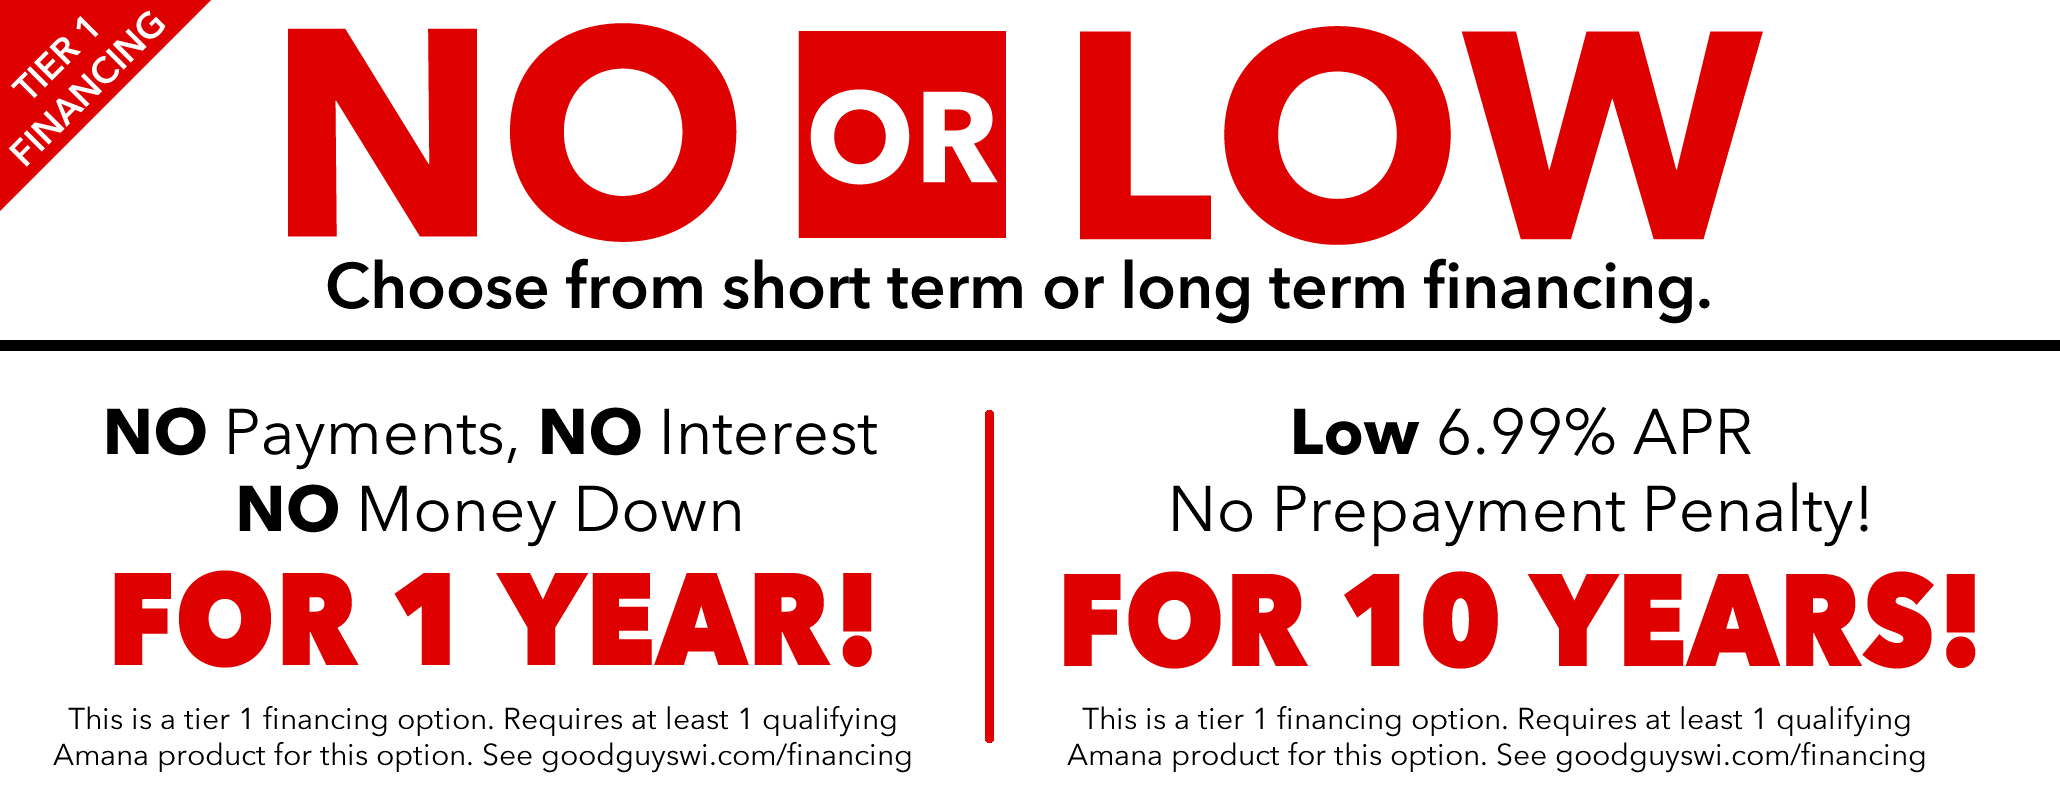 NO or LOW? Choose from short term or long term financing options. 1 Year Same-as-Cash VS Low 6.99% for up to 10 years!